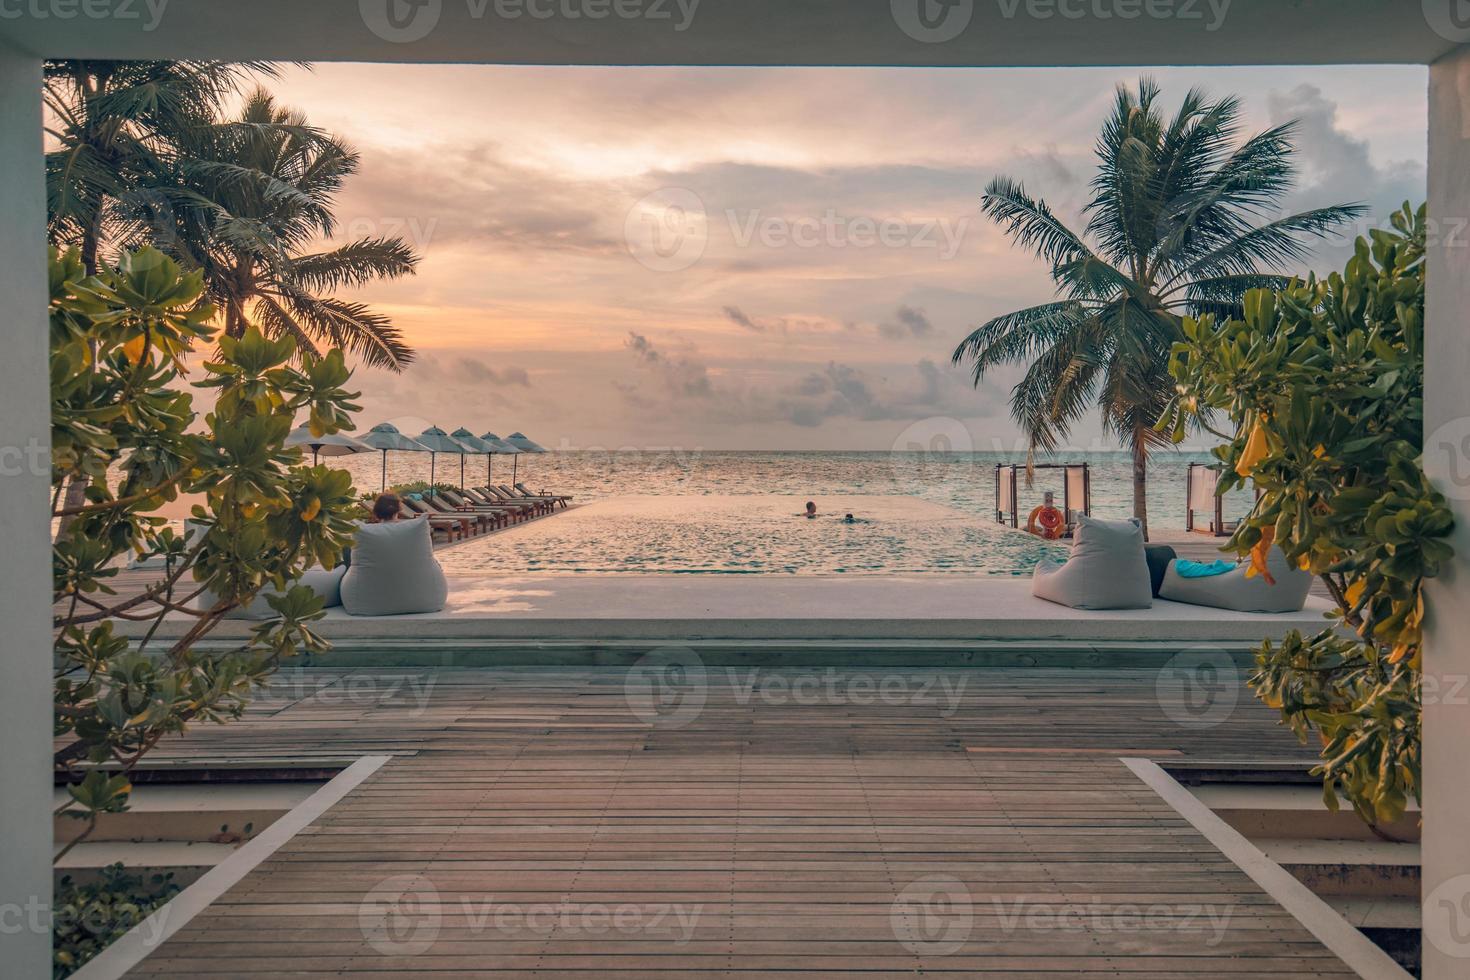 Luxury outdoor poolside, infinity swimming pool with palm trees and sunset sky close to beach and sea. Beautiful resort beach pool, tranquil family or couple summer vacation destination photo